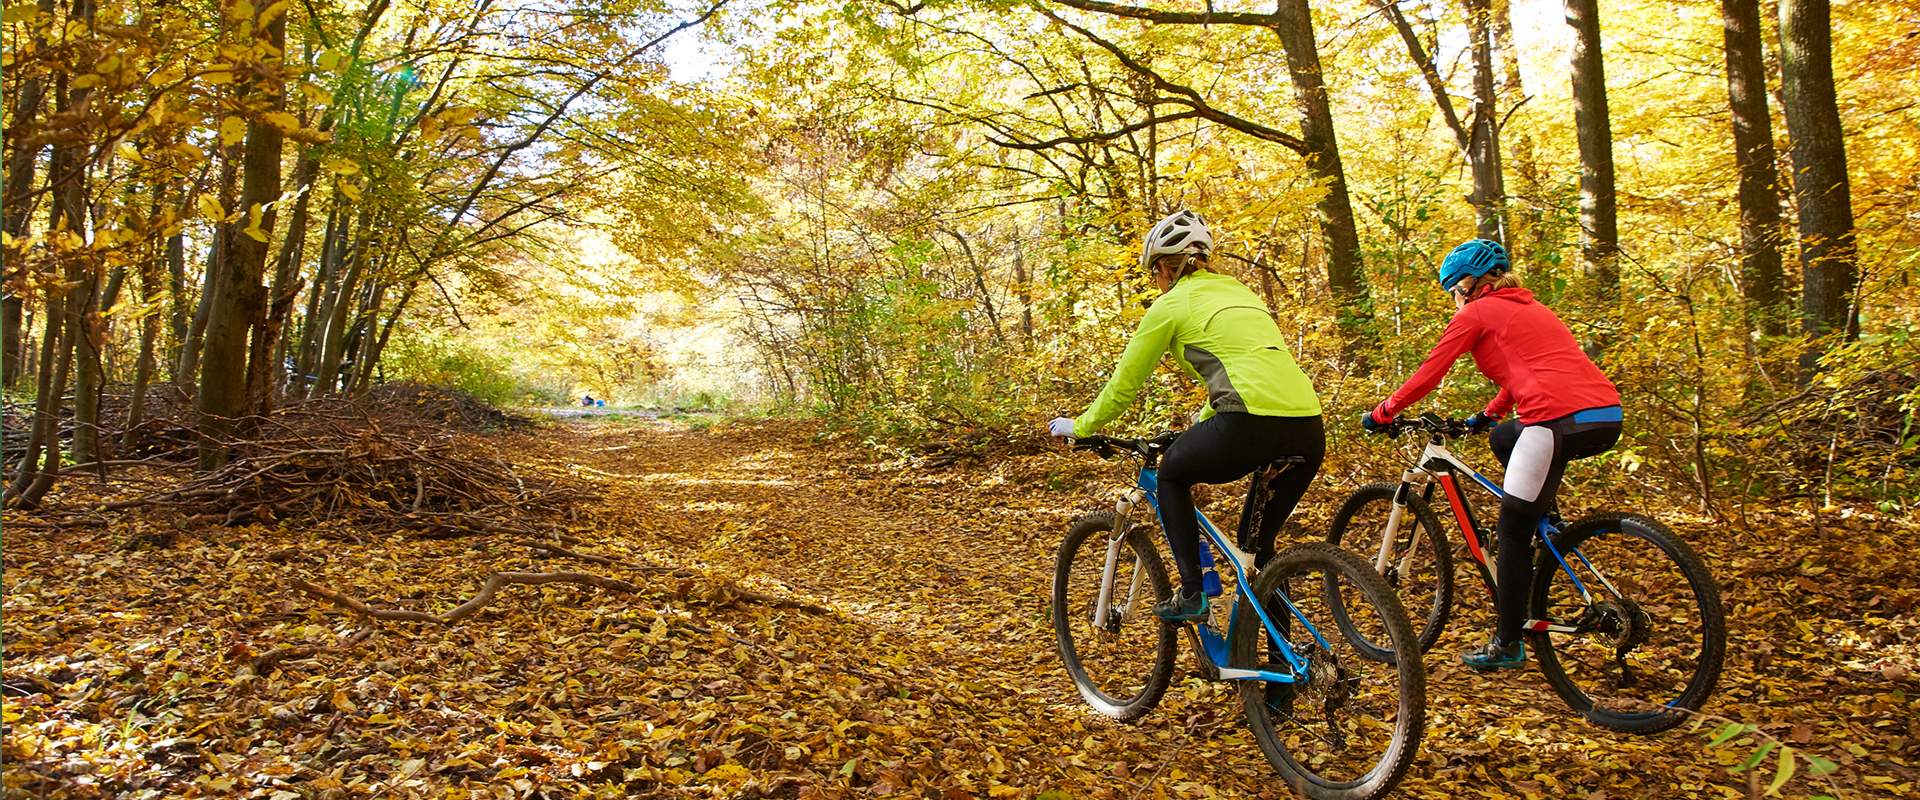 Two female cyclists cycling through trail with fallen leaves